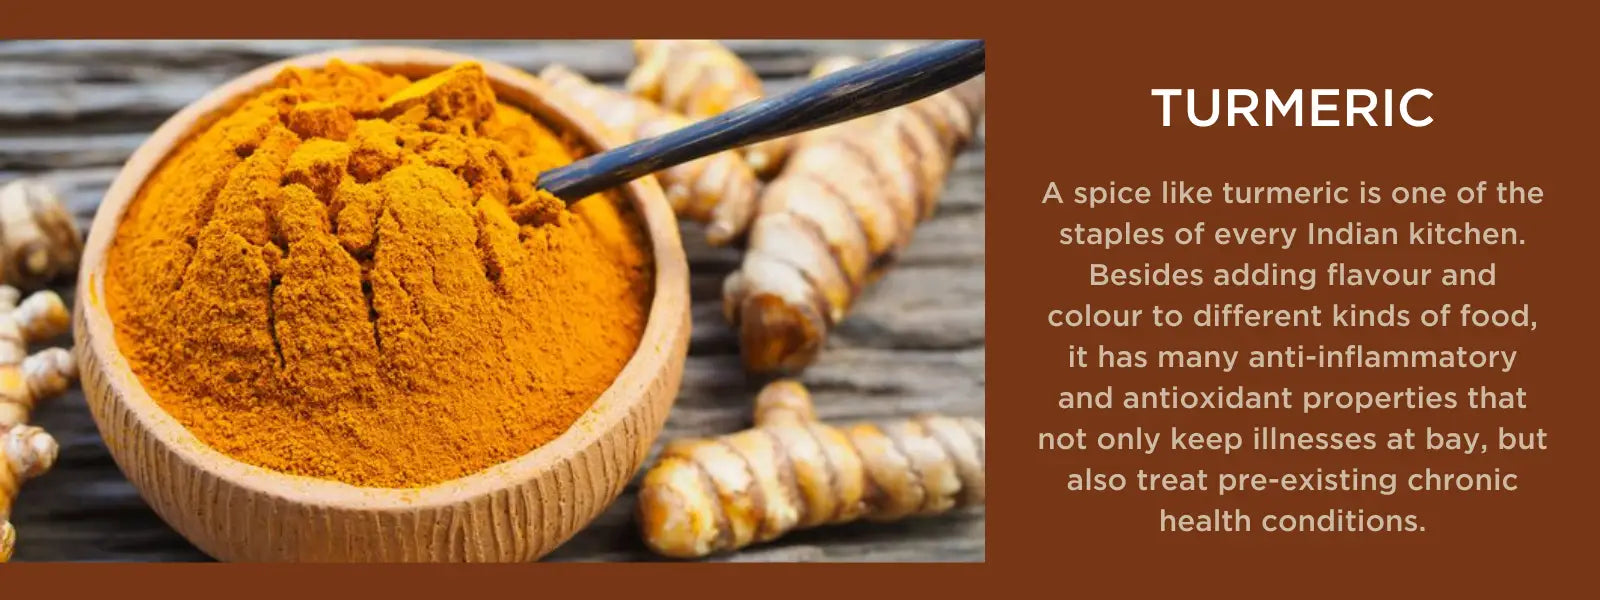 Turmeric - Health Benefits, Uses and Important Facts